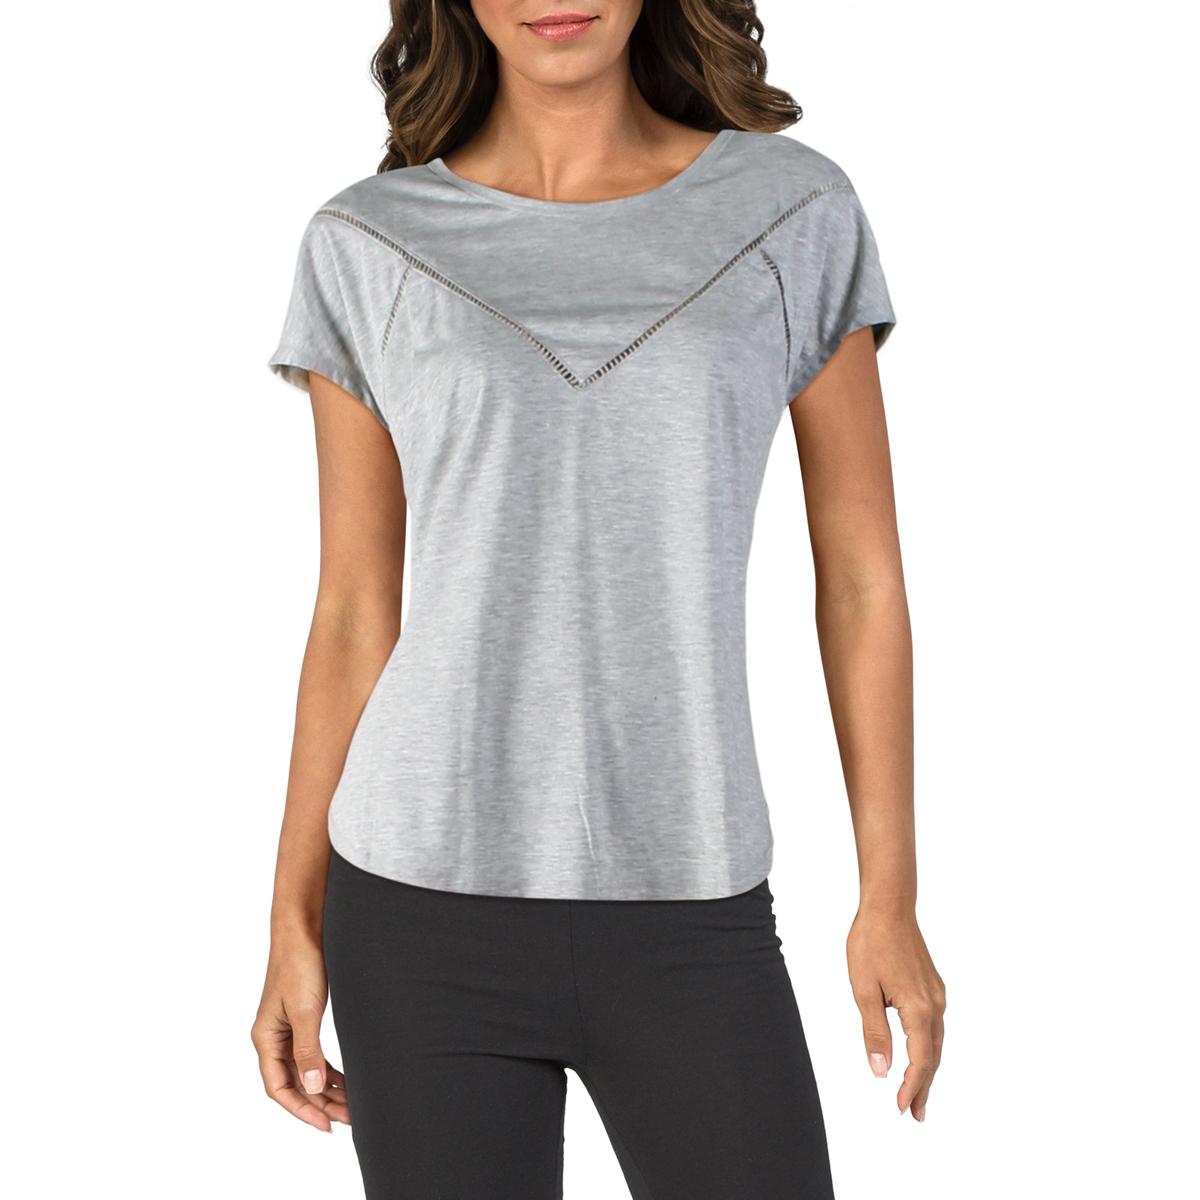 Yogalicious : Workout Clothes & Activewear for Women : Target